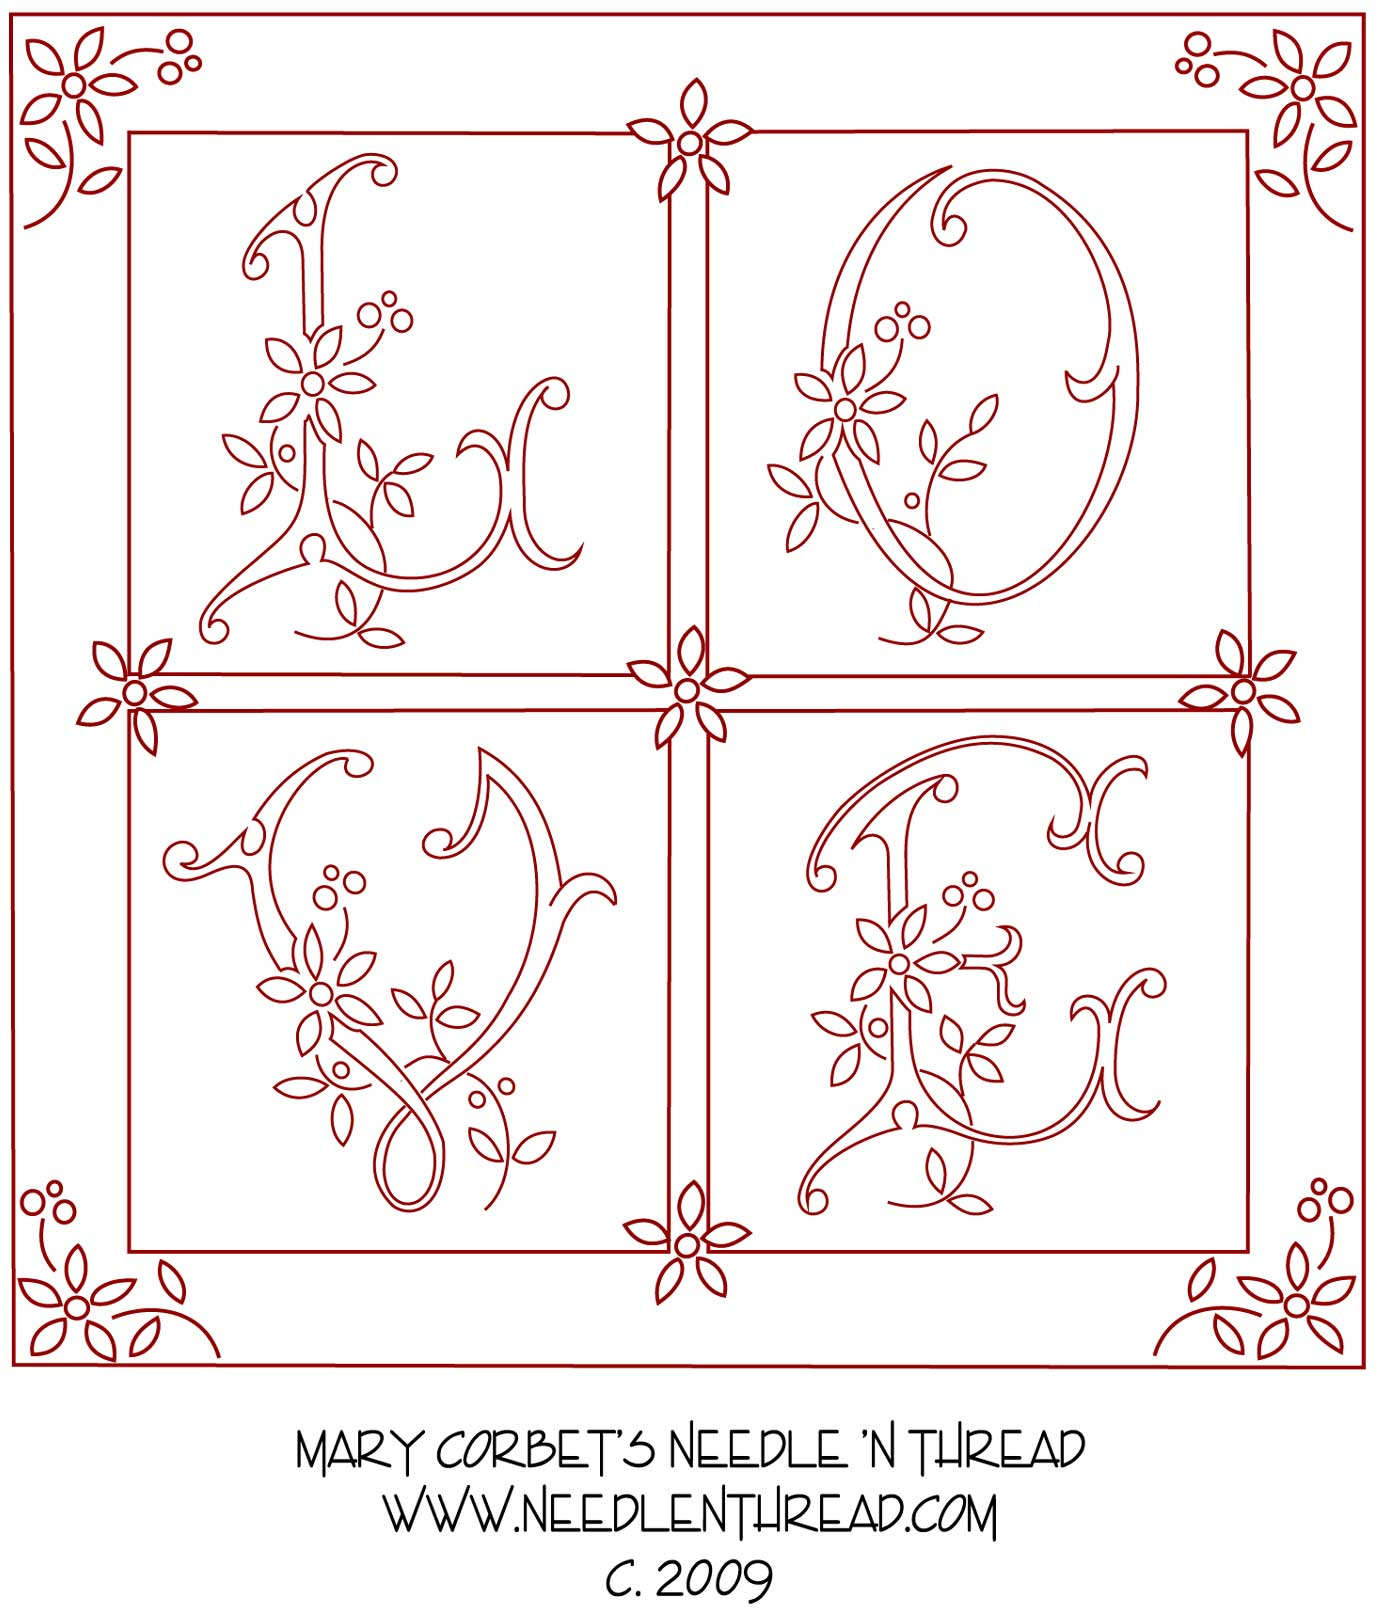 Embroidery Patterns Online A More Complex Hand Embroidery Pattern Psuedo Original Love